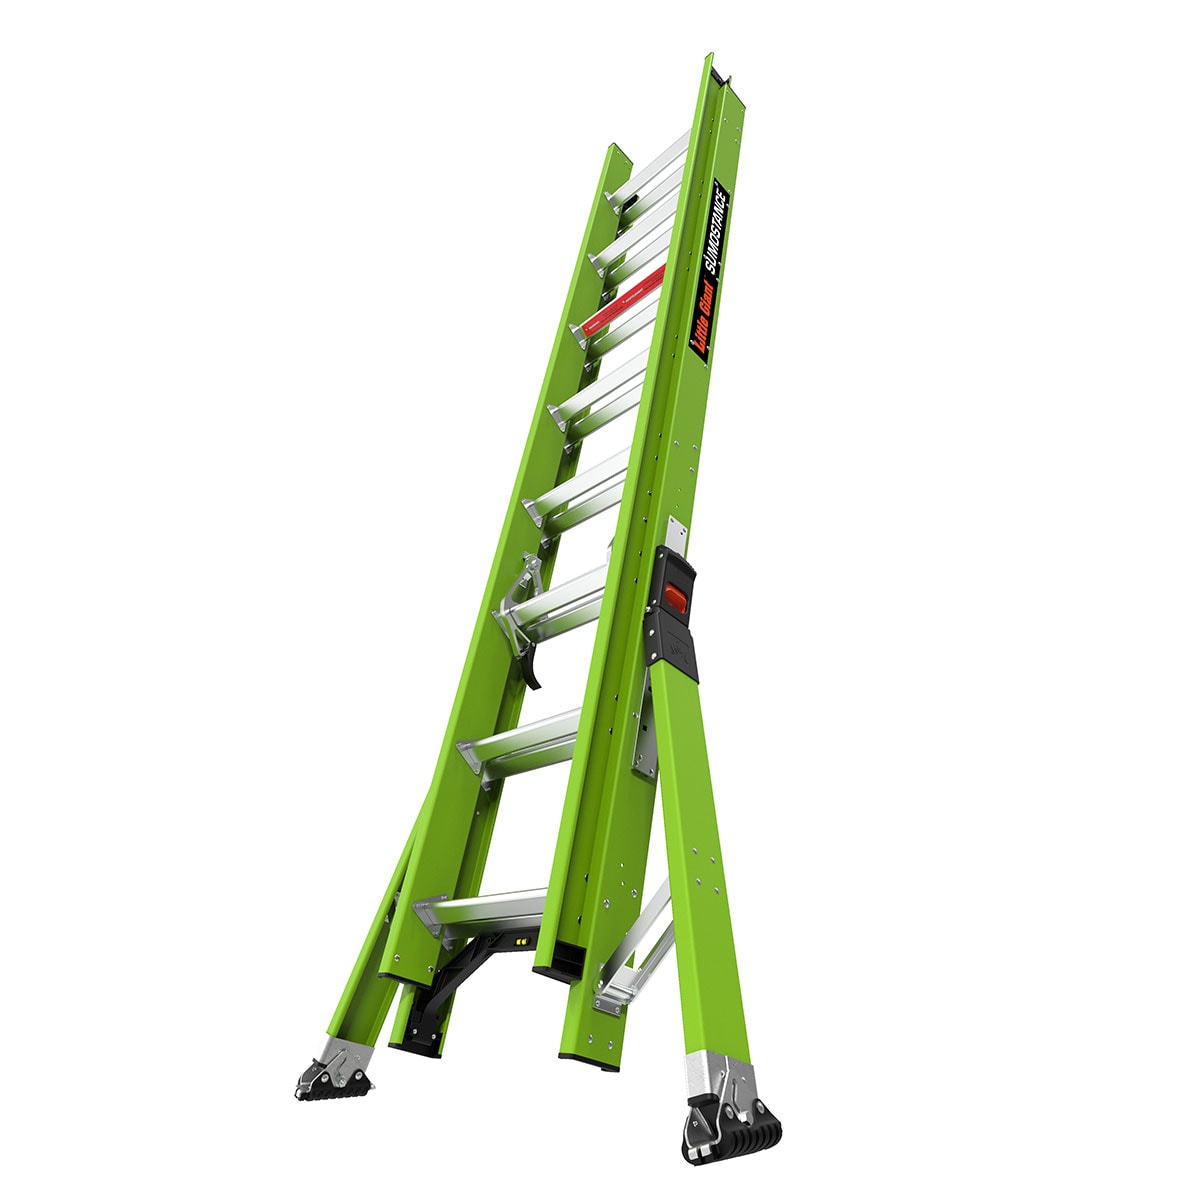 Little Giant Ladders Sumostance M16 16-ft Fiberglass Type 1a- 300-lb Load  Capacity Telescoping Extension Ladder